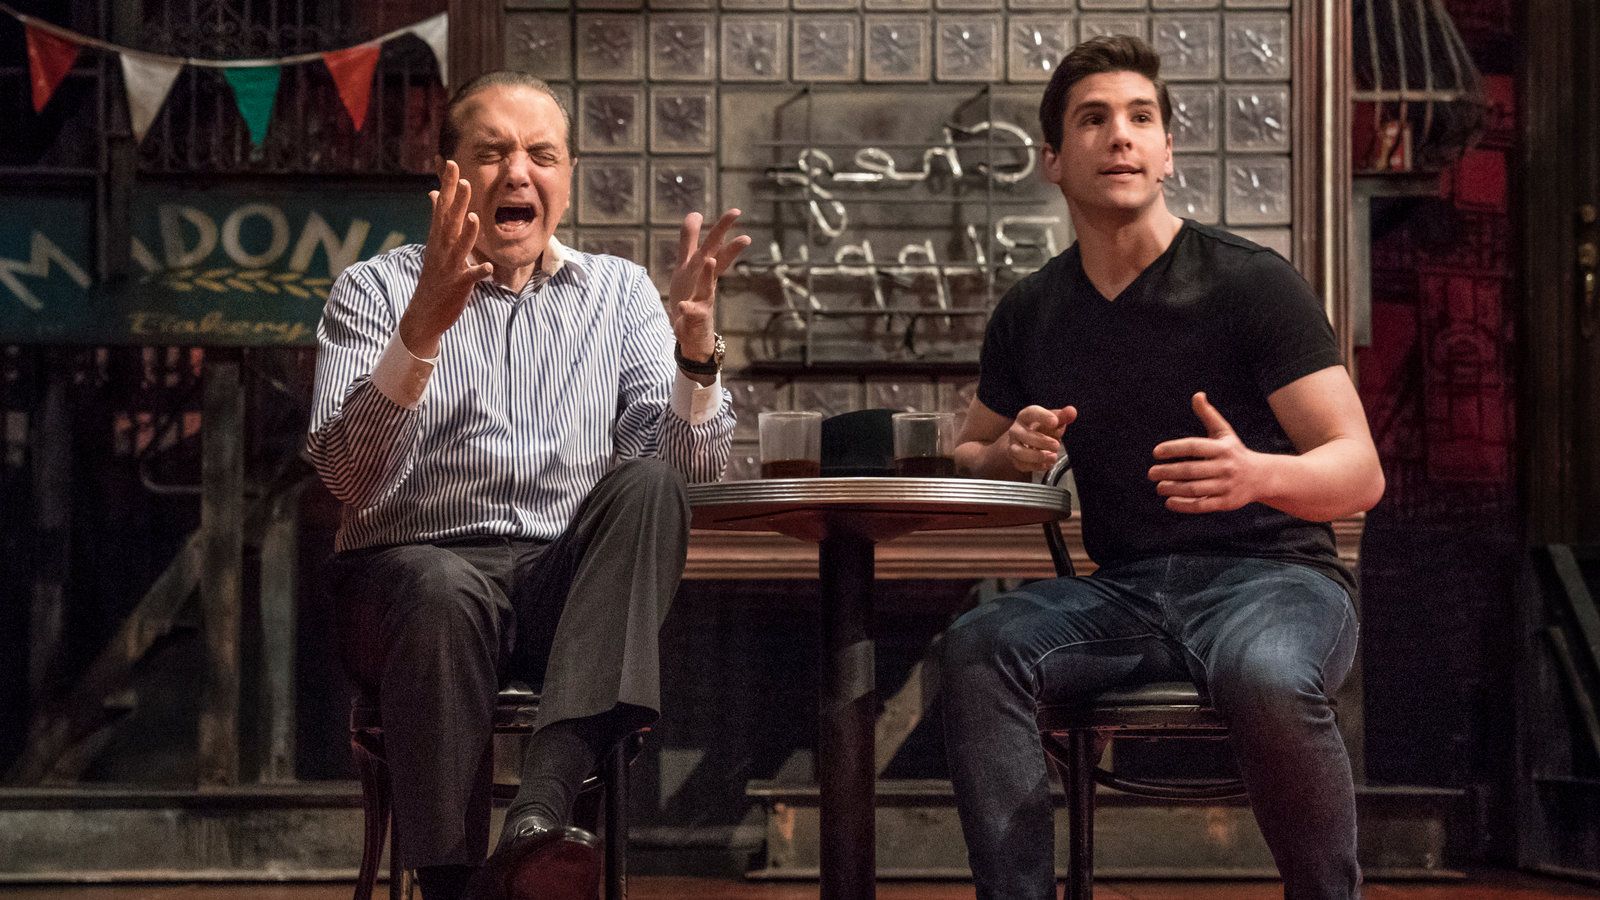 Chazz Palminteri Is Singing. Sonny .nytimes.com